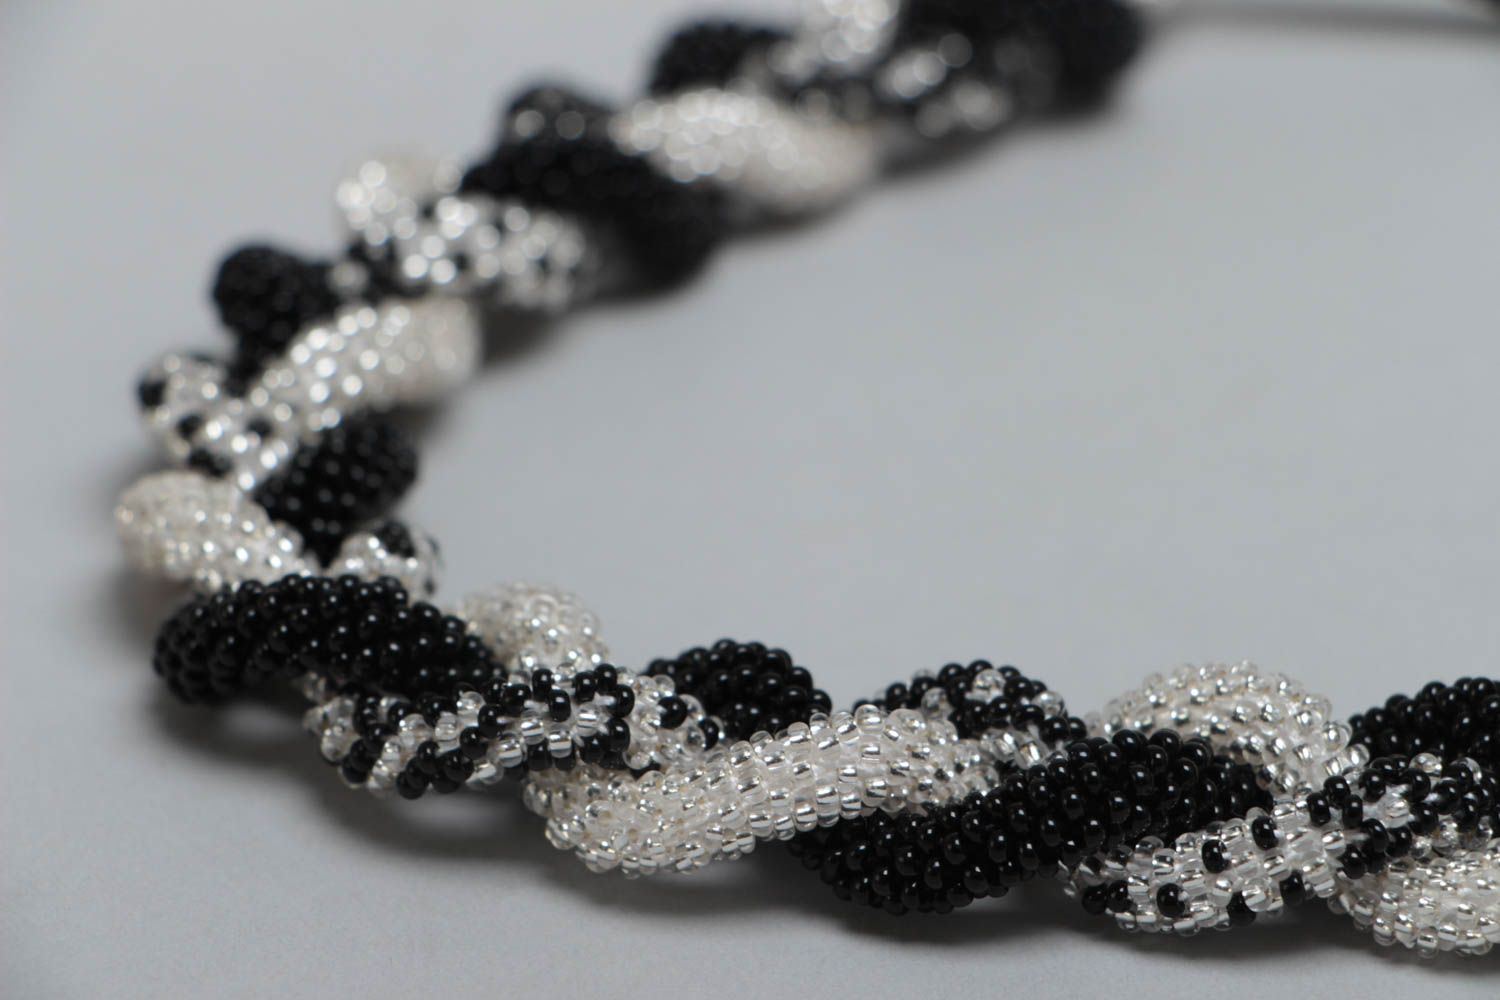 Handmade beaded necklace in black and silver colors transformer jewelry photo 3